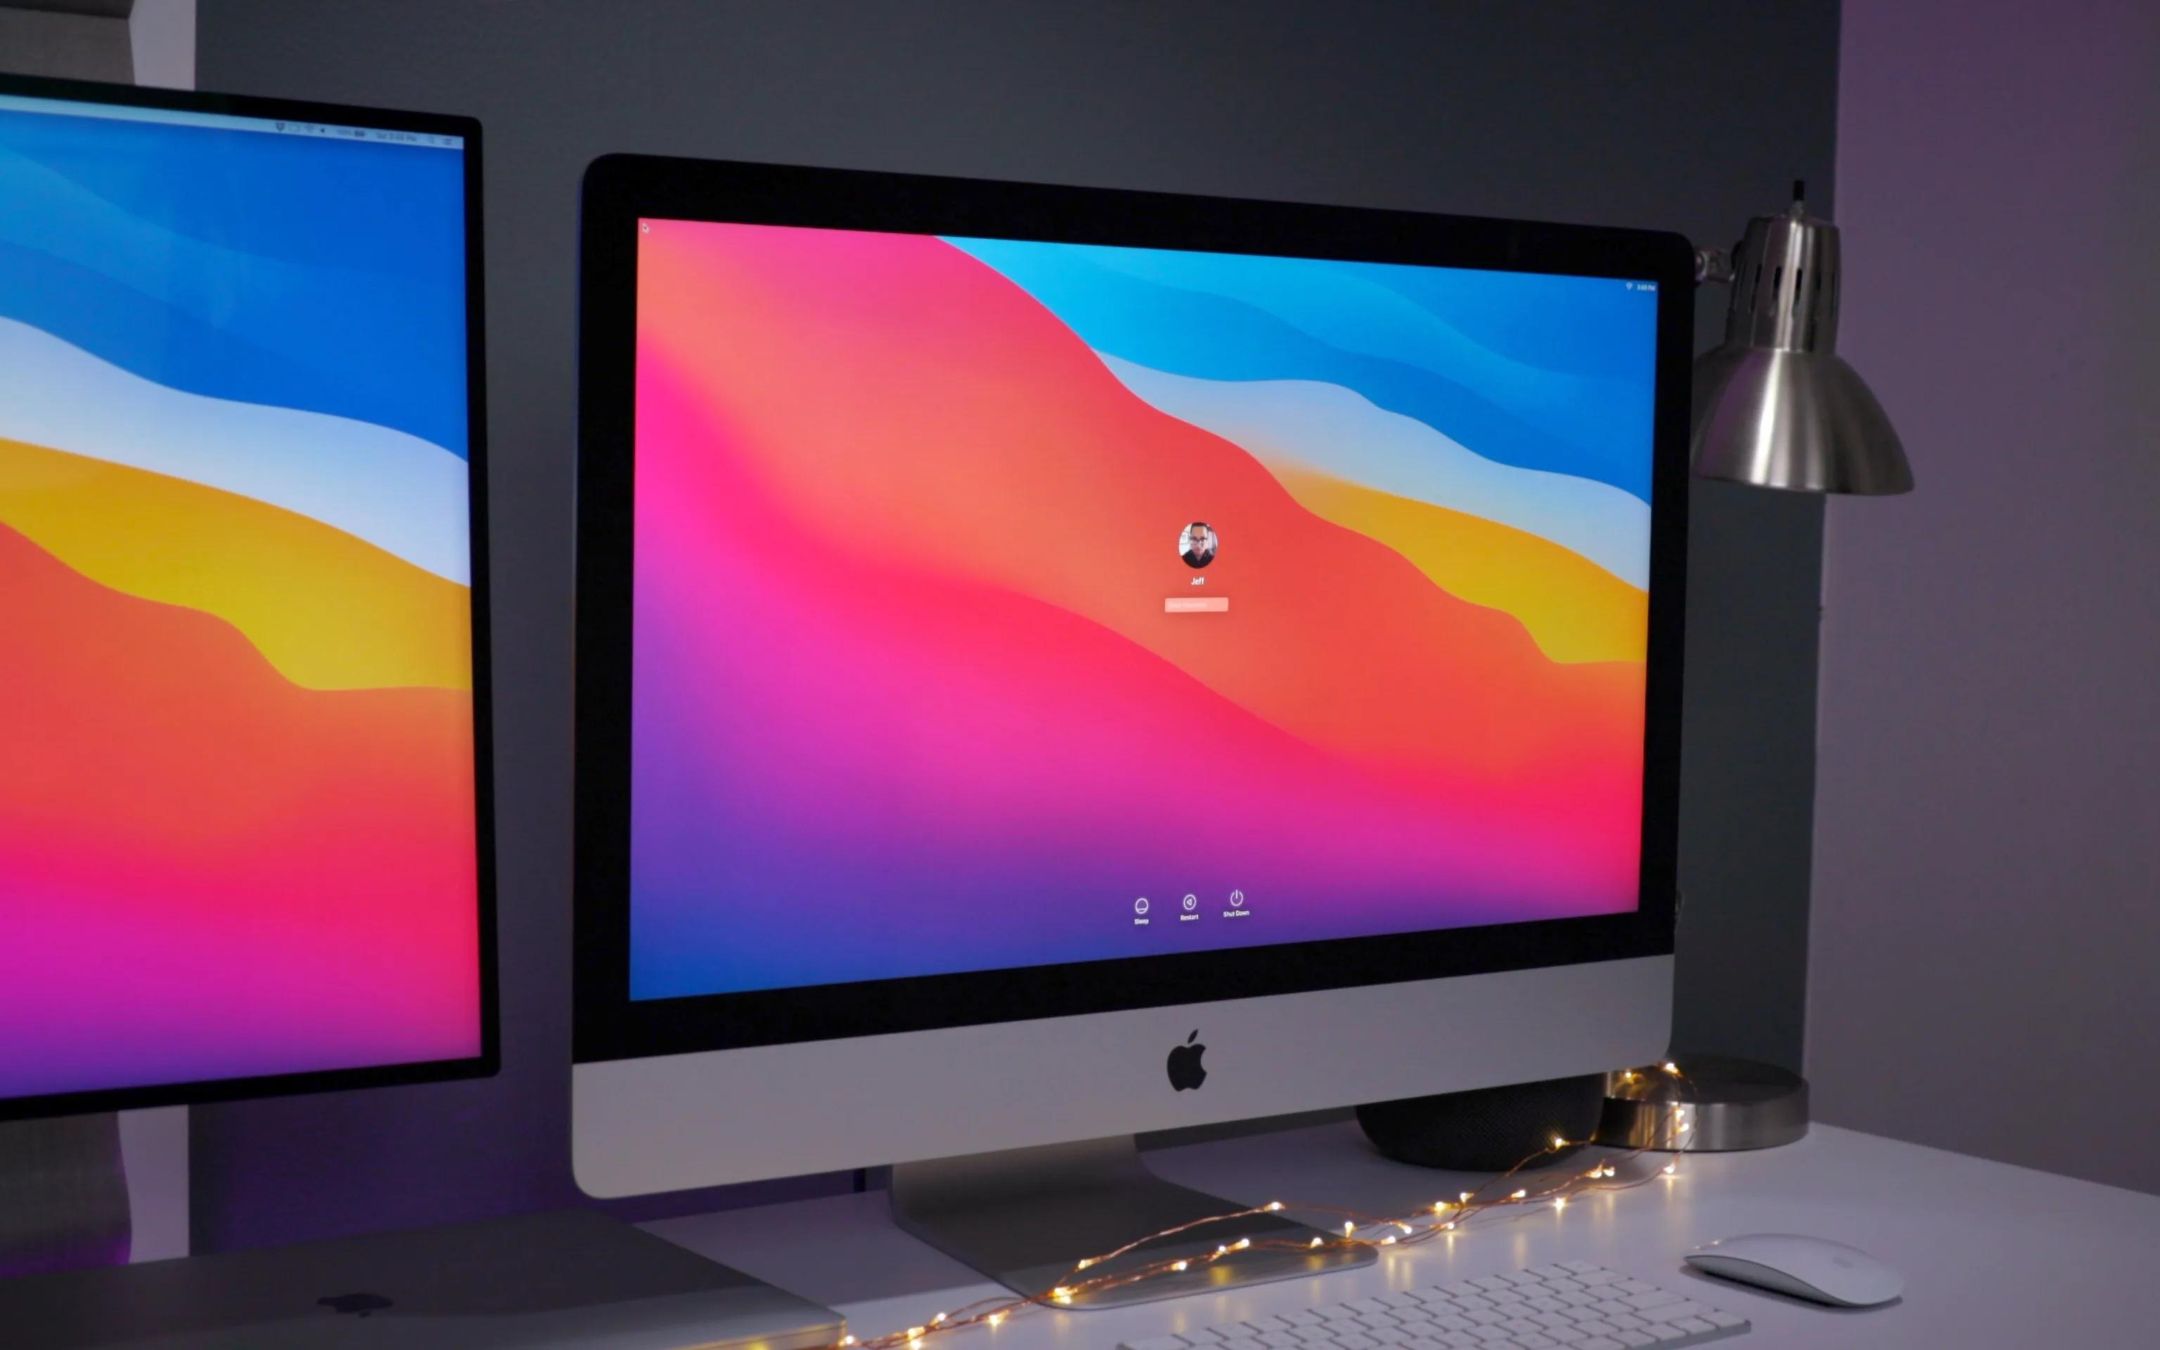 Apple is thinking of a huge iMac with a screen of more than 30 inches